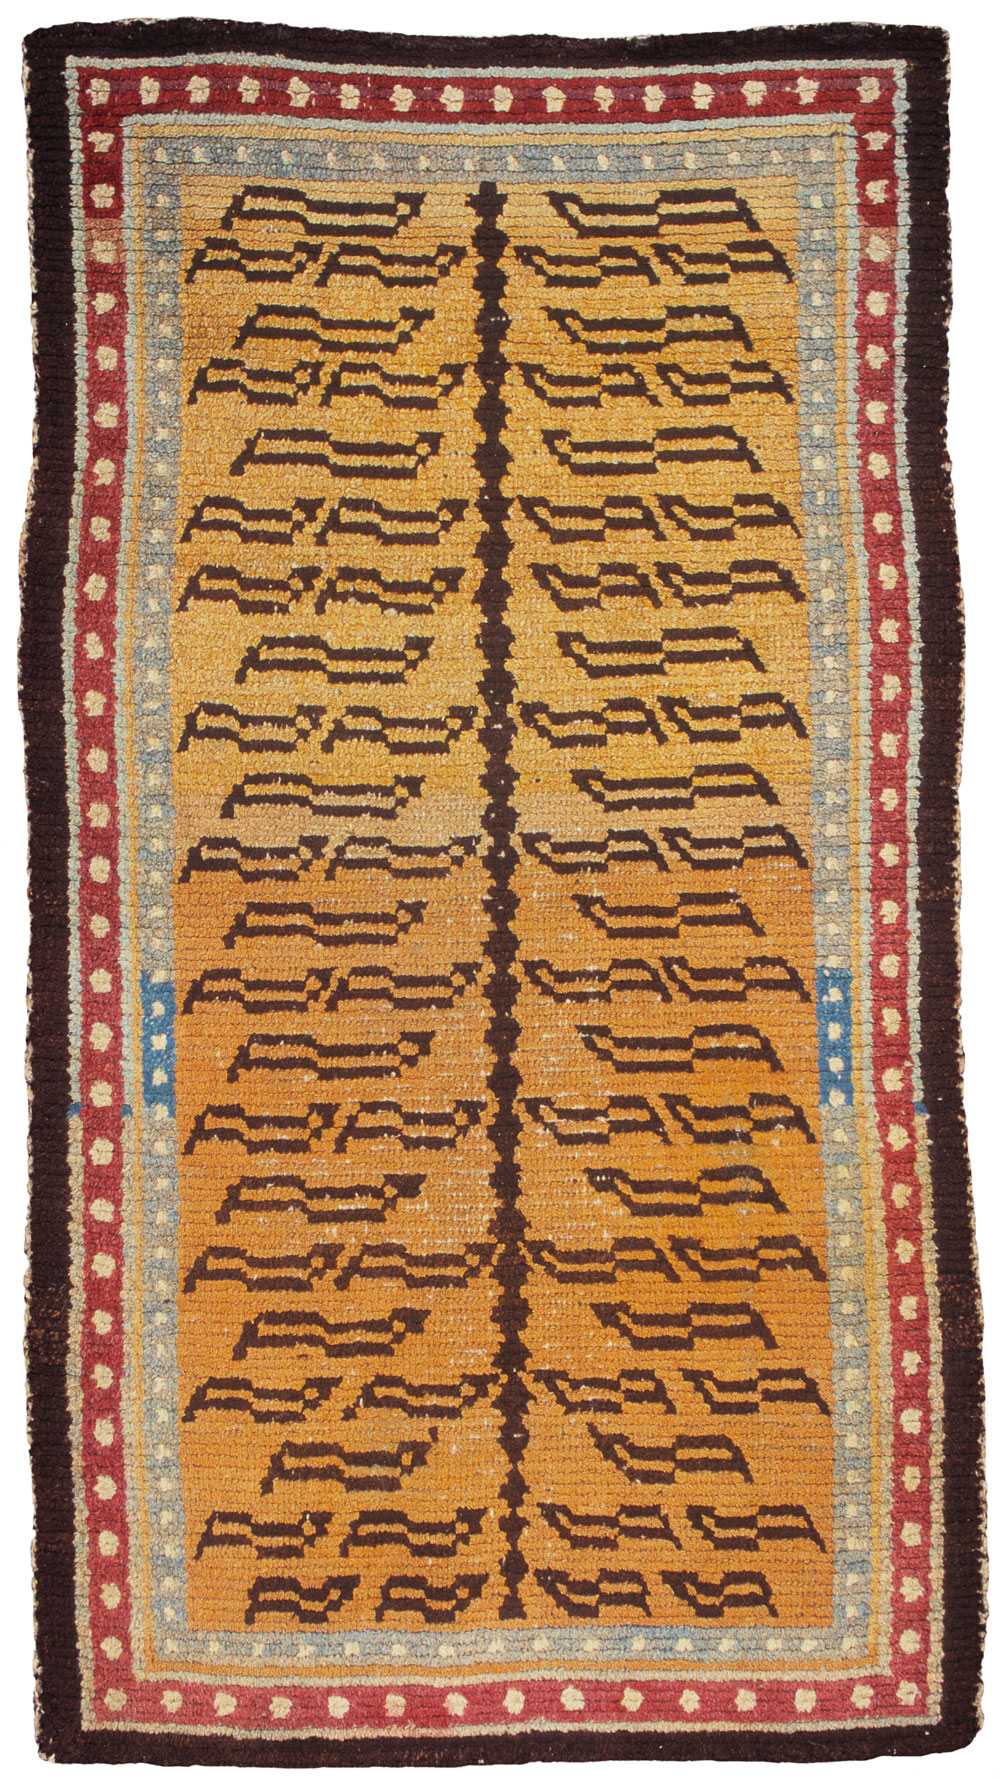 Tibetan rugs at Cologne Fine Art 2014, Tiger Rug with double pearl border, 19th century, 137 x 78 cm